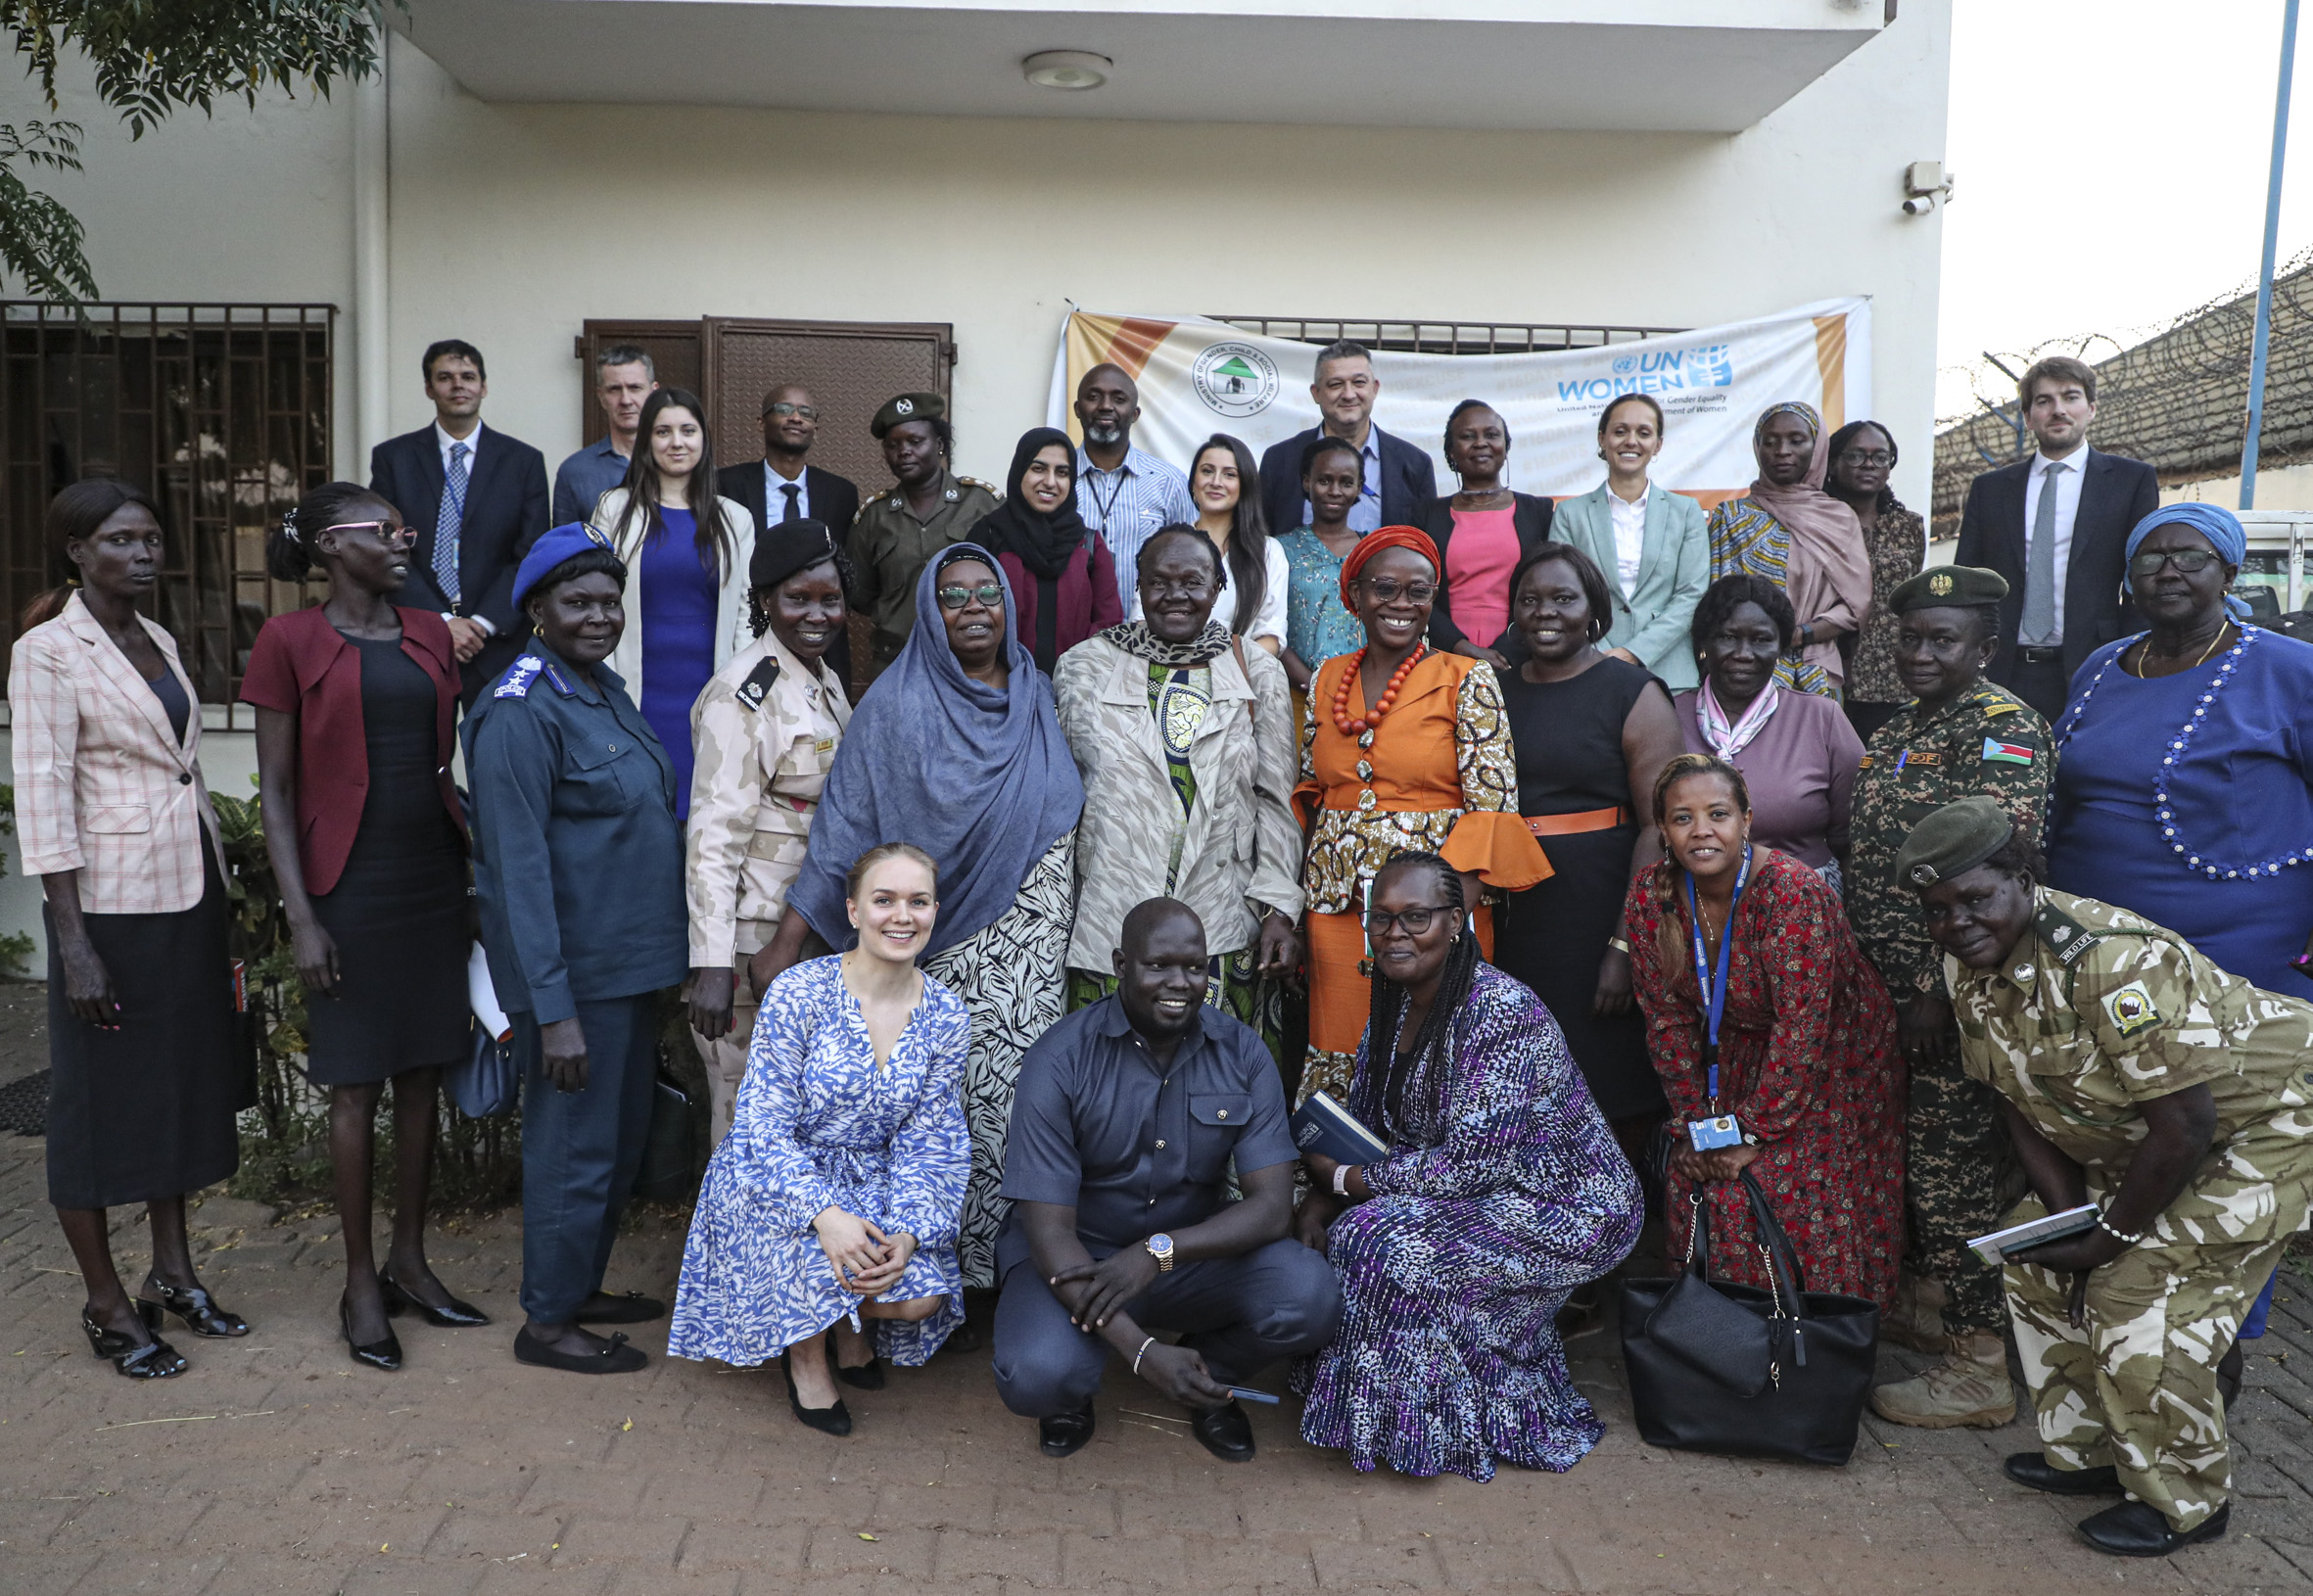 Members of the Informal Expert Group on Women, Peace and Security meeting with civil society organizations, the Executive Board of the National Security Sector Women’s Network, and Women’s Parliamentary Caucus in Juba, South Sudan. Photo: UNMISS